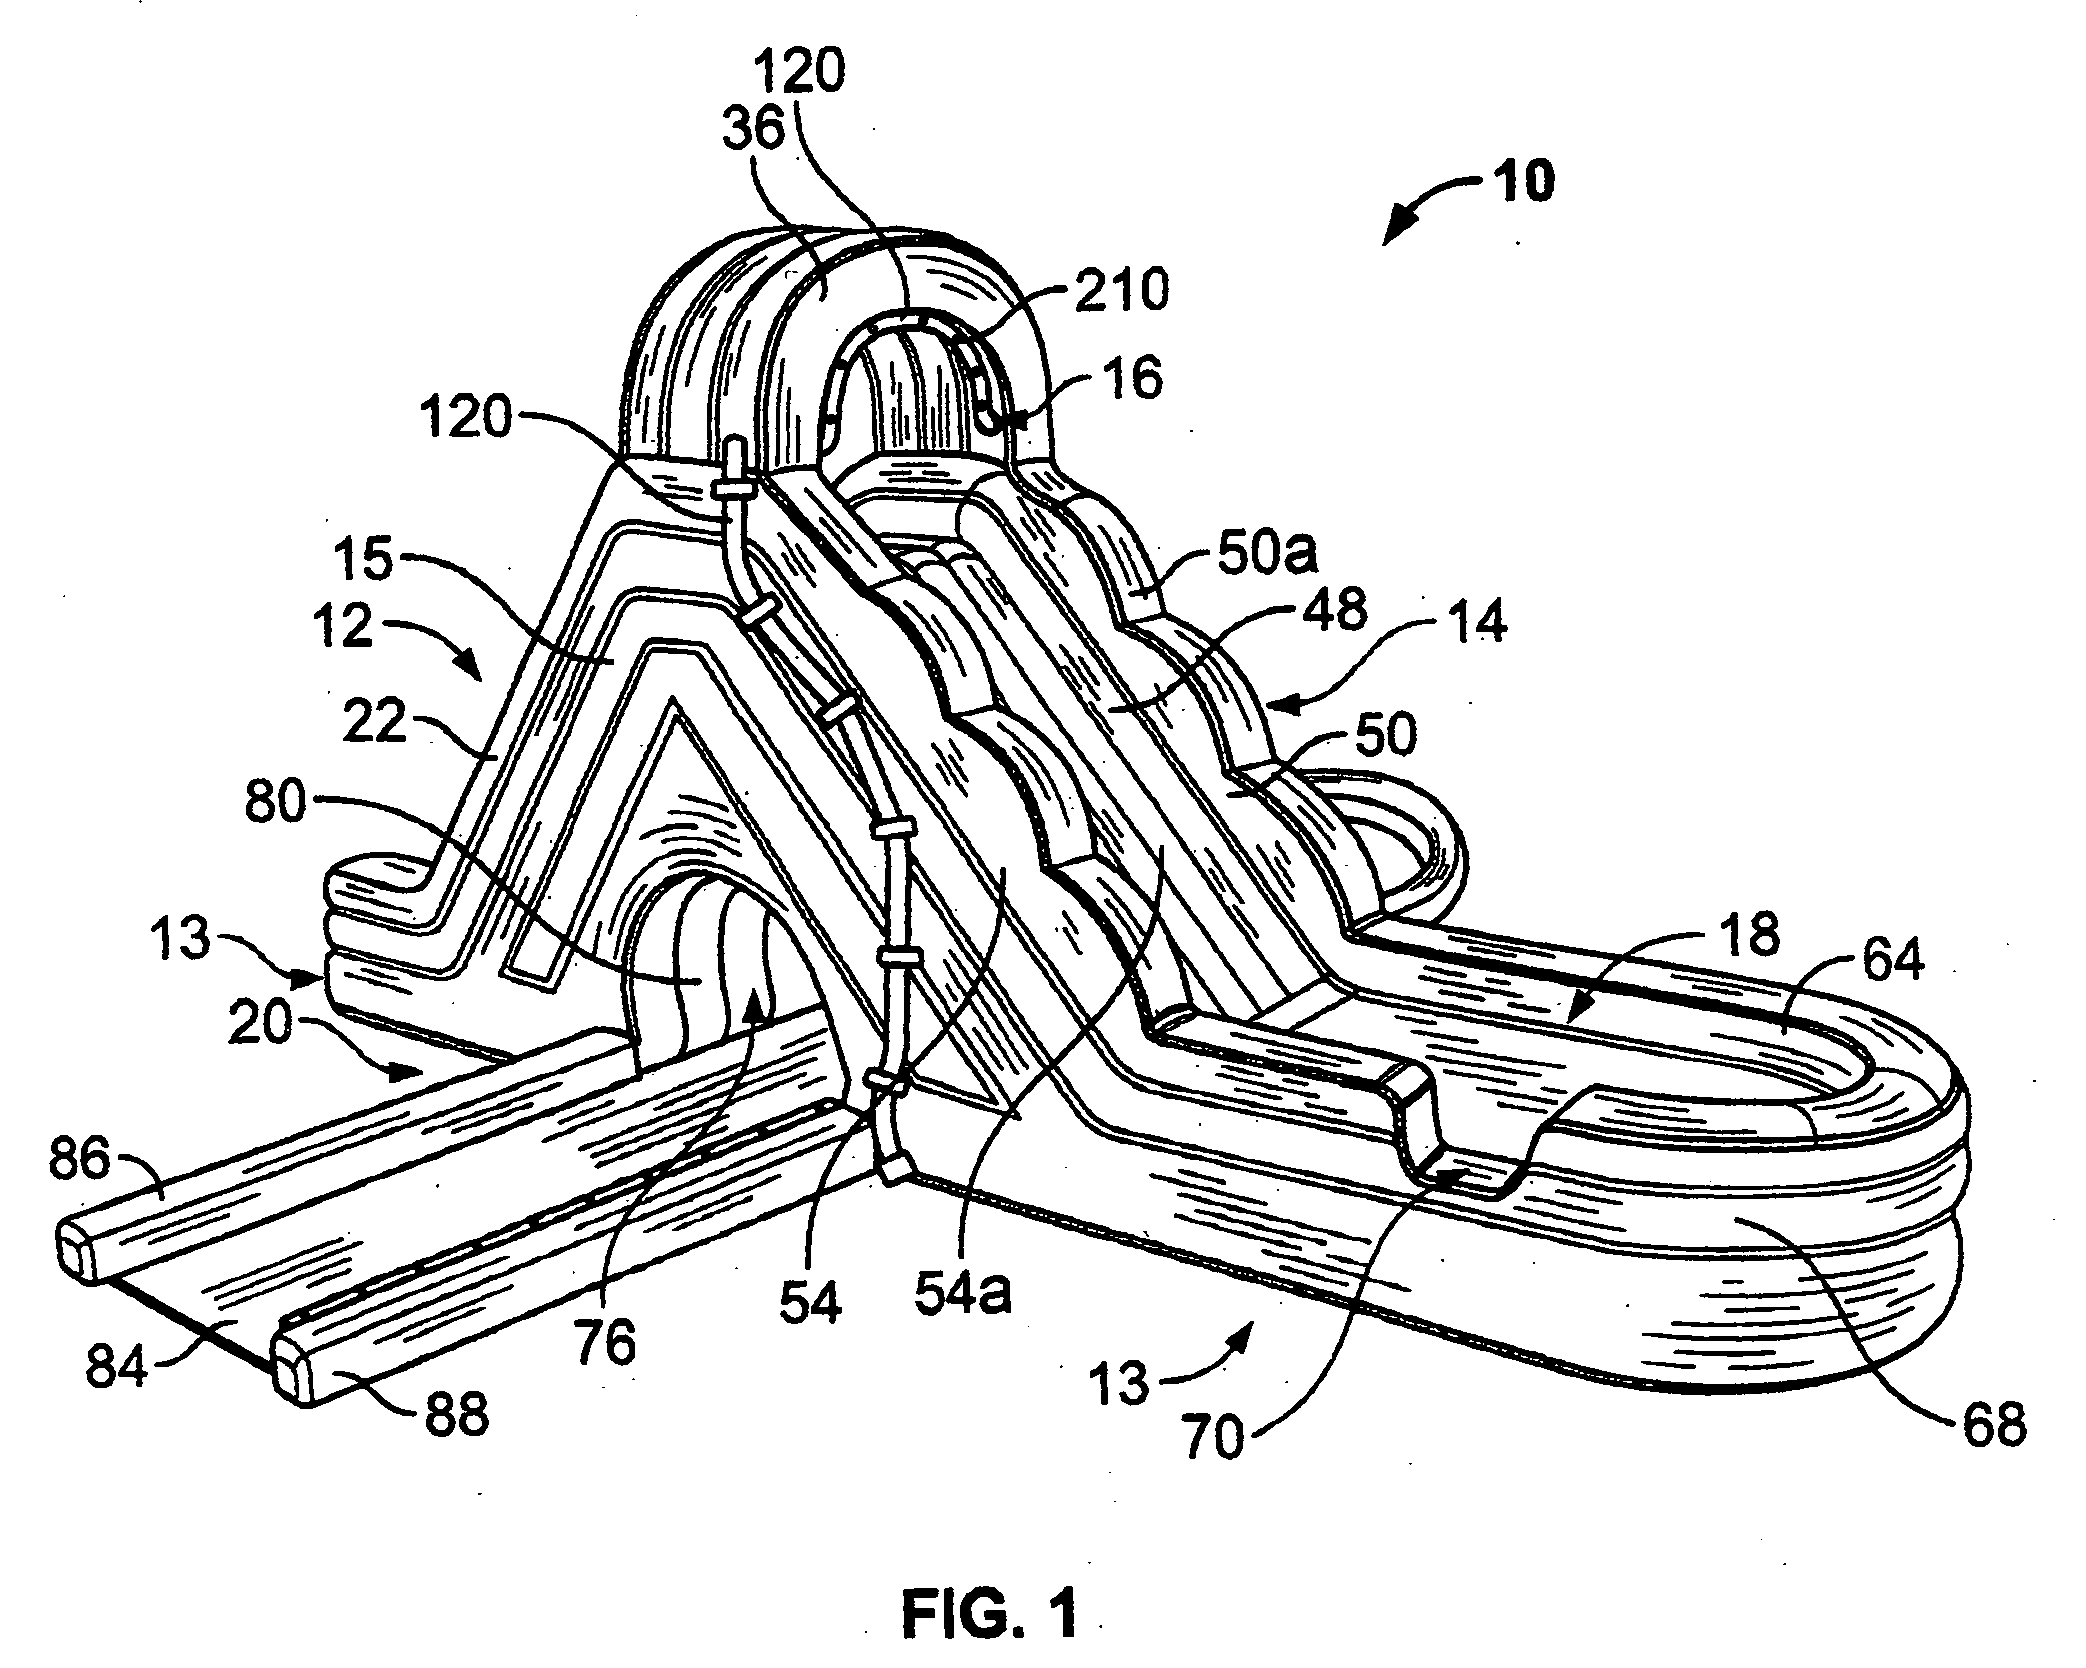 Inflatable car-wash-configured water toy and method